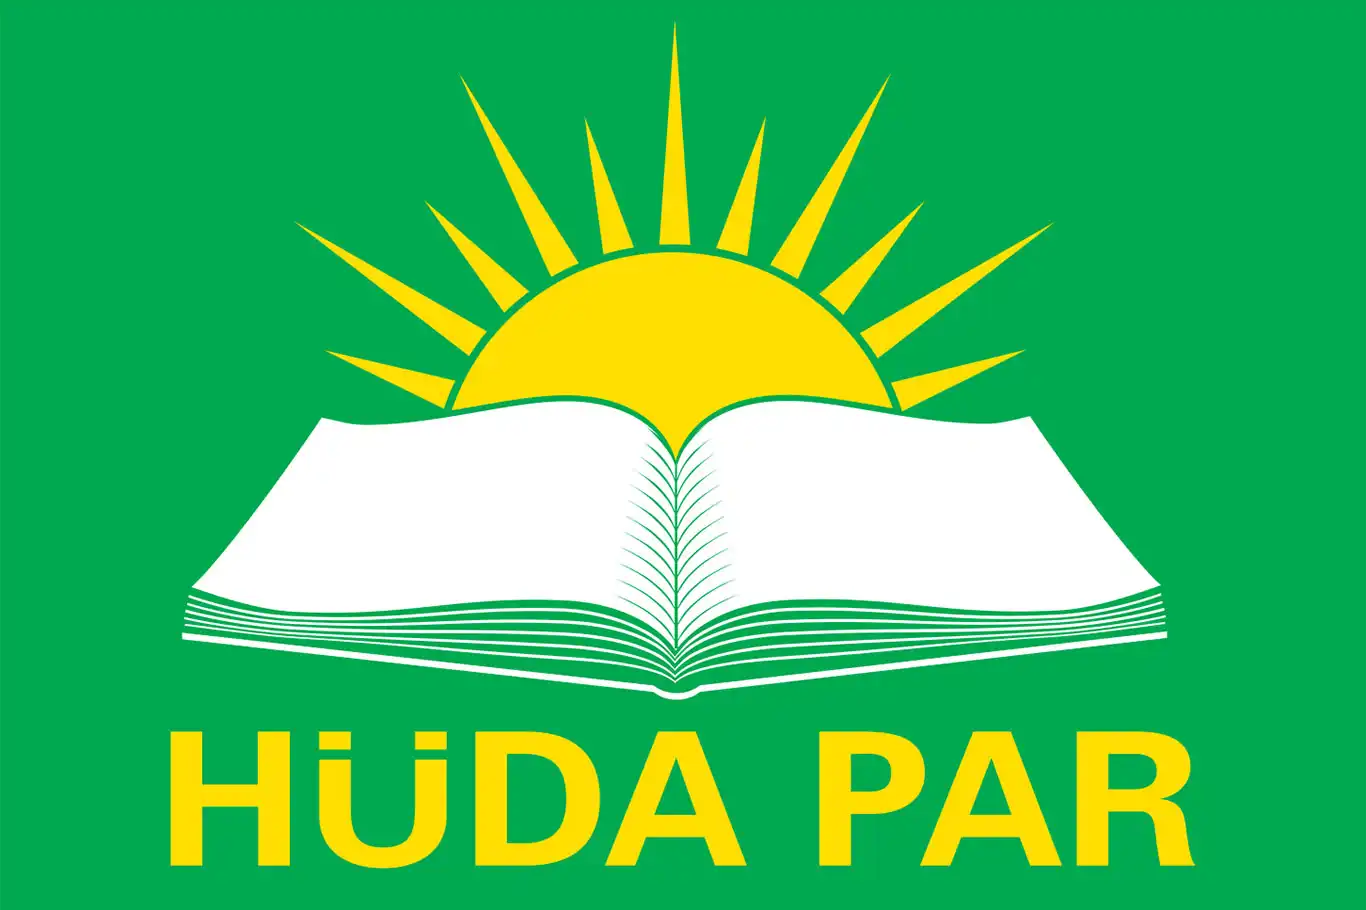 HÜDA PAR calls for better rights and services for disabled citizens